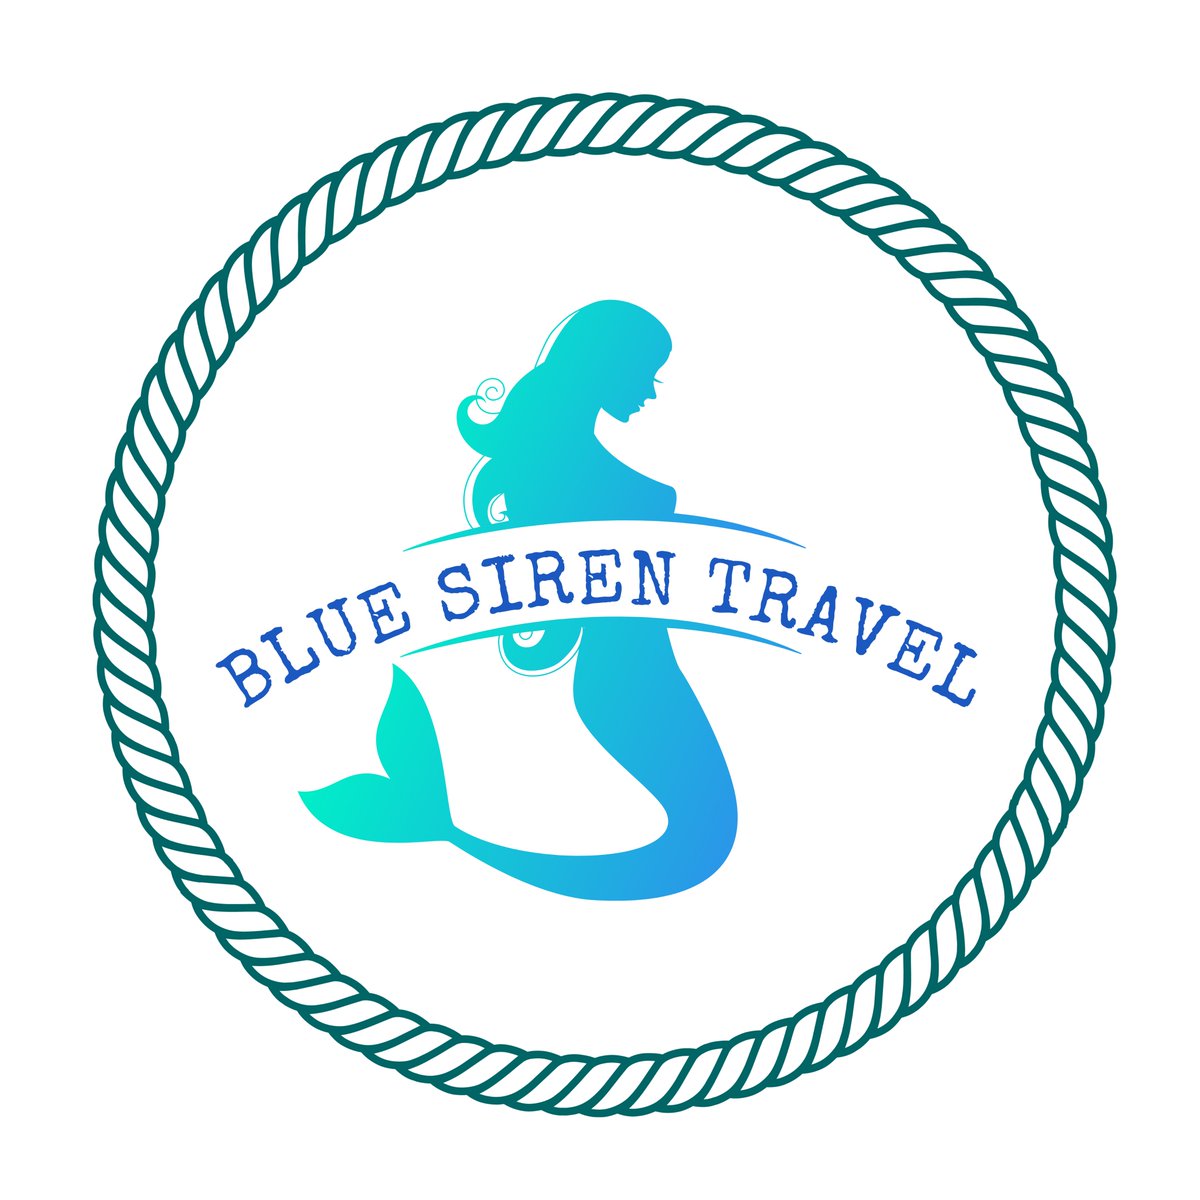 My logo is made! 
Email bluesirentravel@gmail.com or text or call 636-515-5734 to start planning your trip today! 📷
#bluesirentravel #bluesirentravellife #booknowtravellater #travelagent